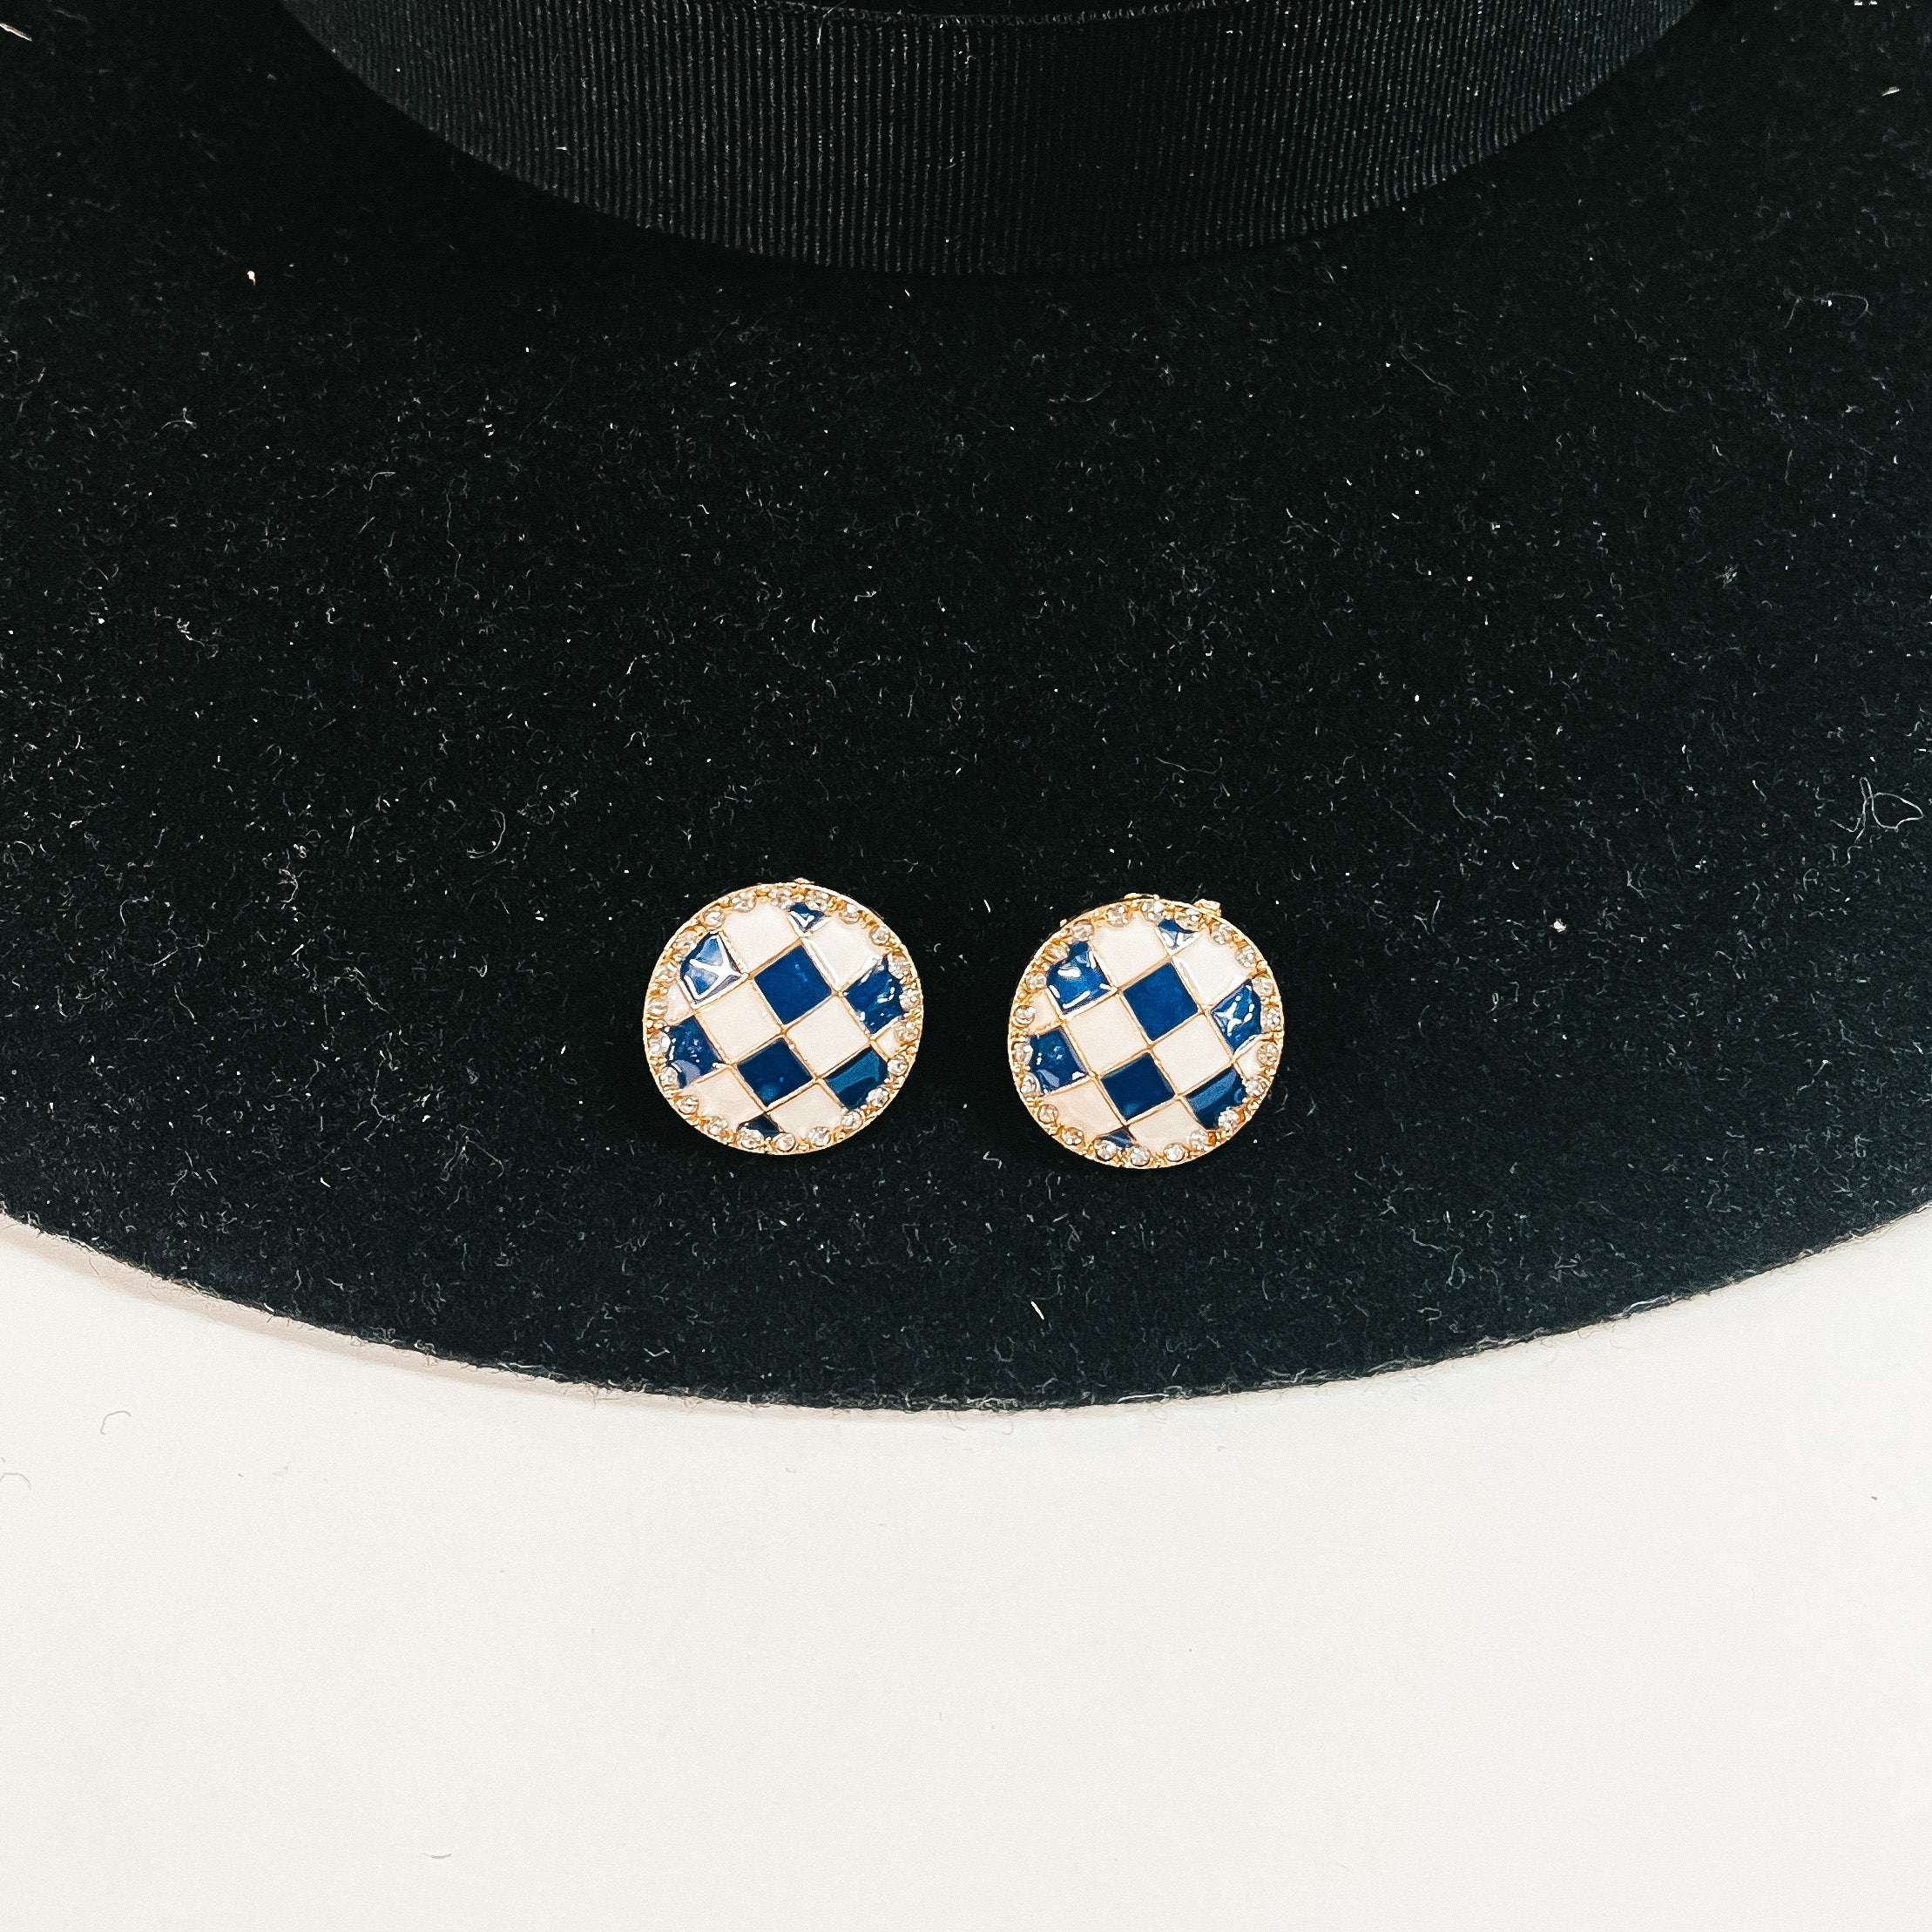 This is a pair of checkered patterned stud earrings in white/blue in a gold  setting with clear crystals all around. This pair of earrings is laying on a  black felt hat brim and on a white background.